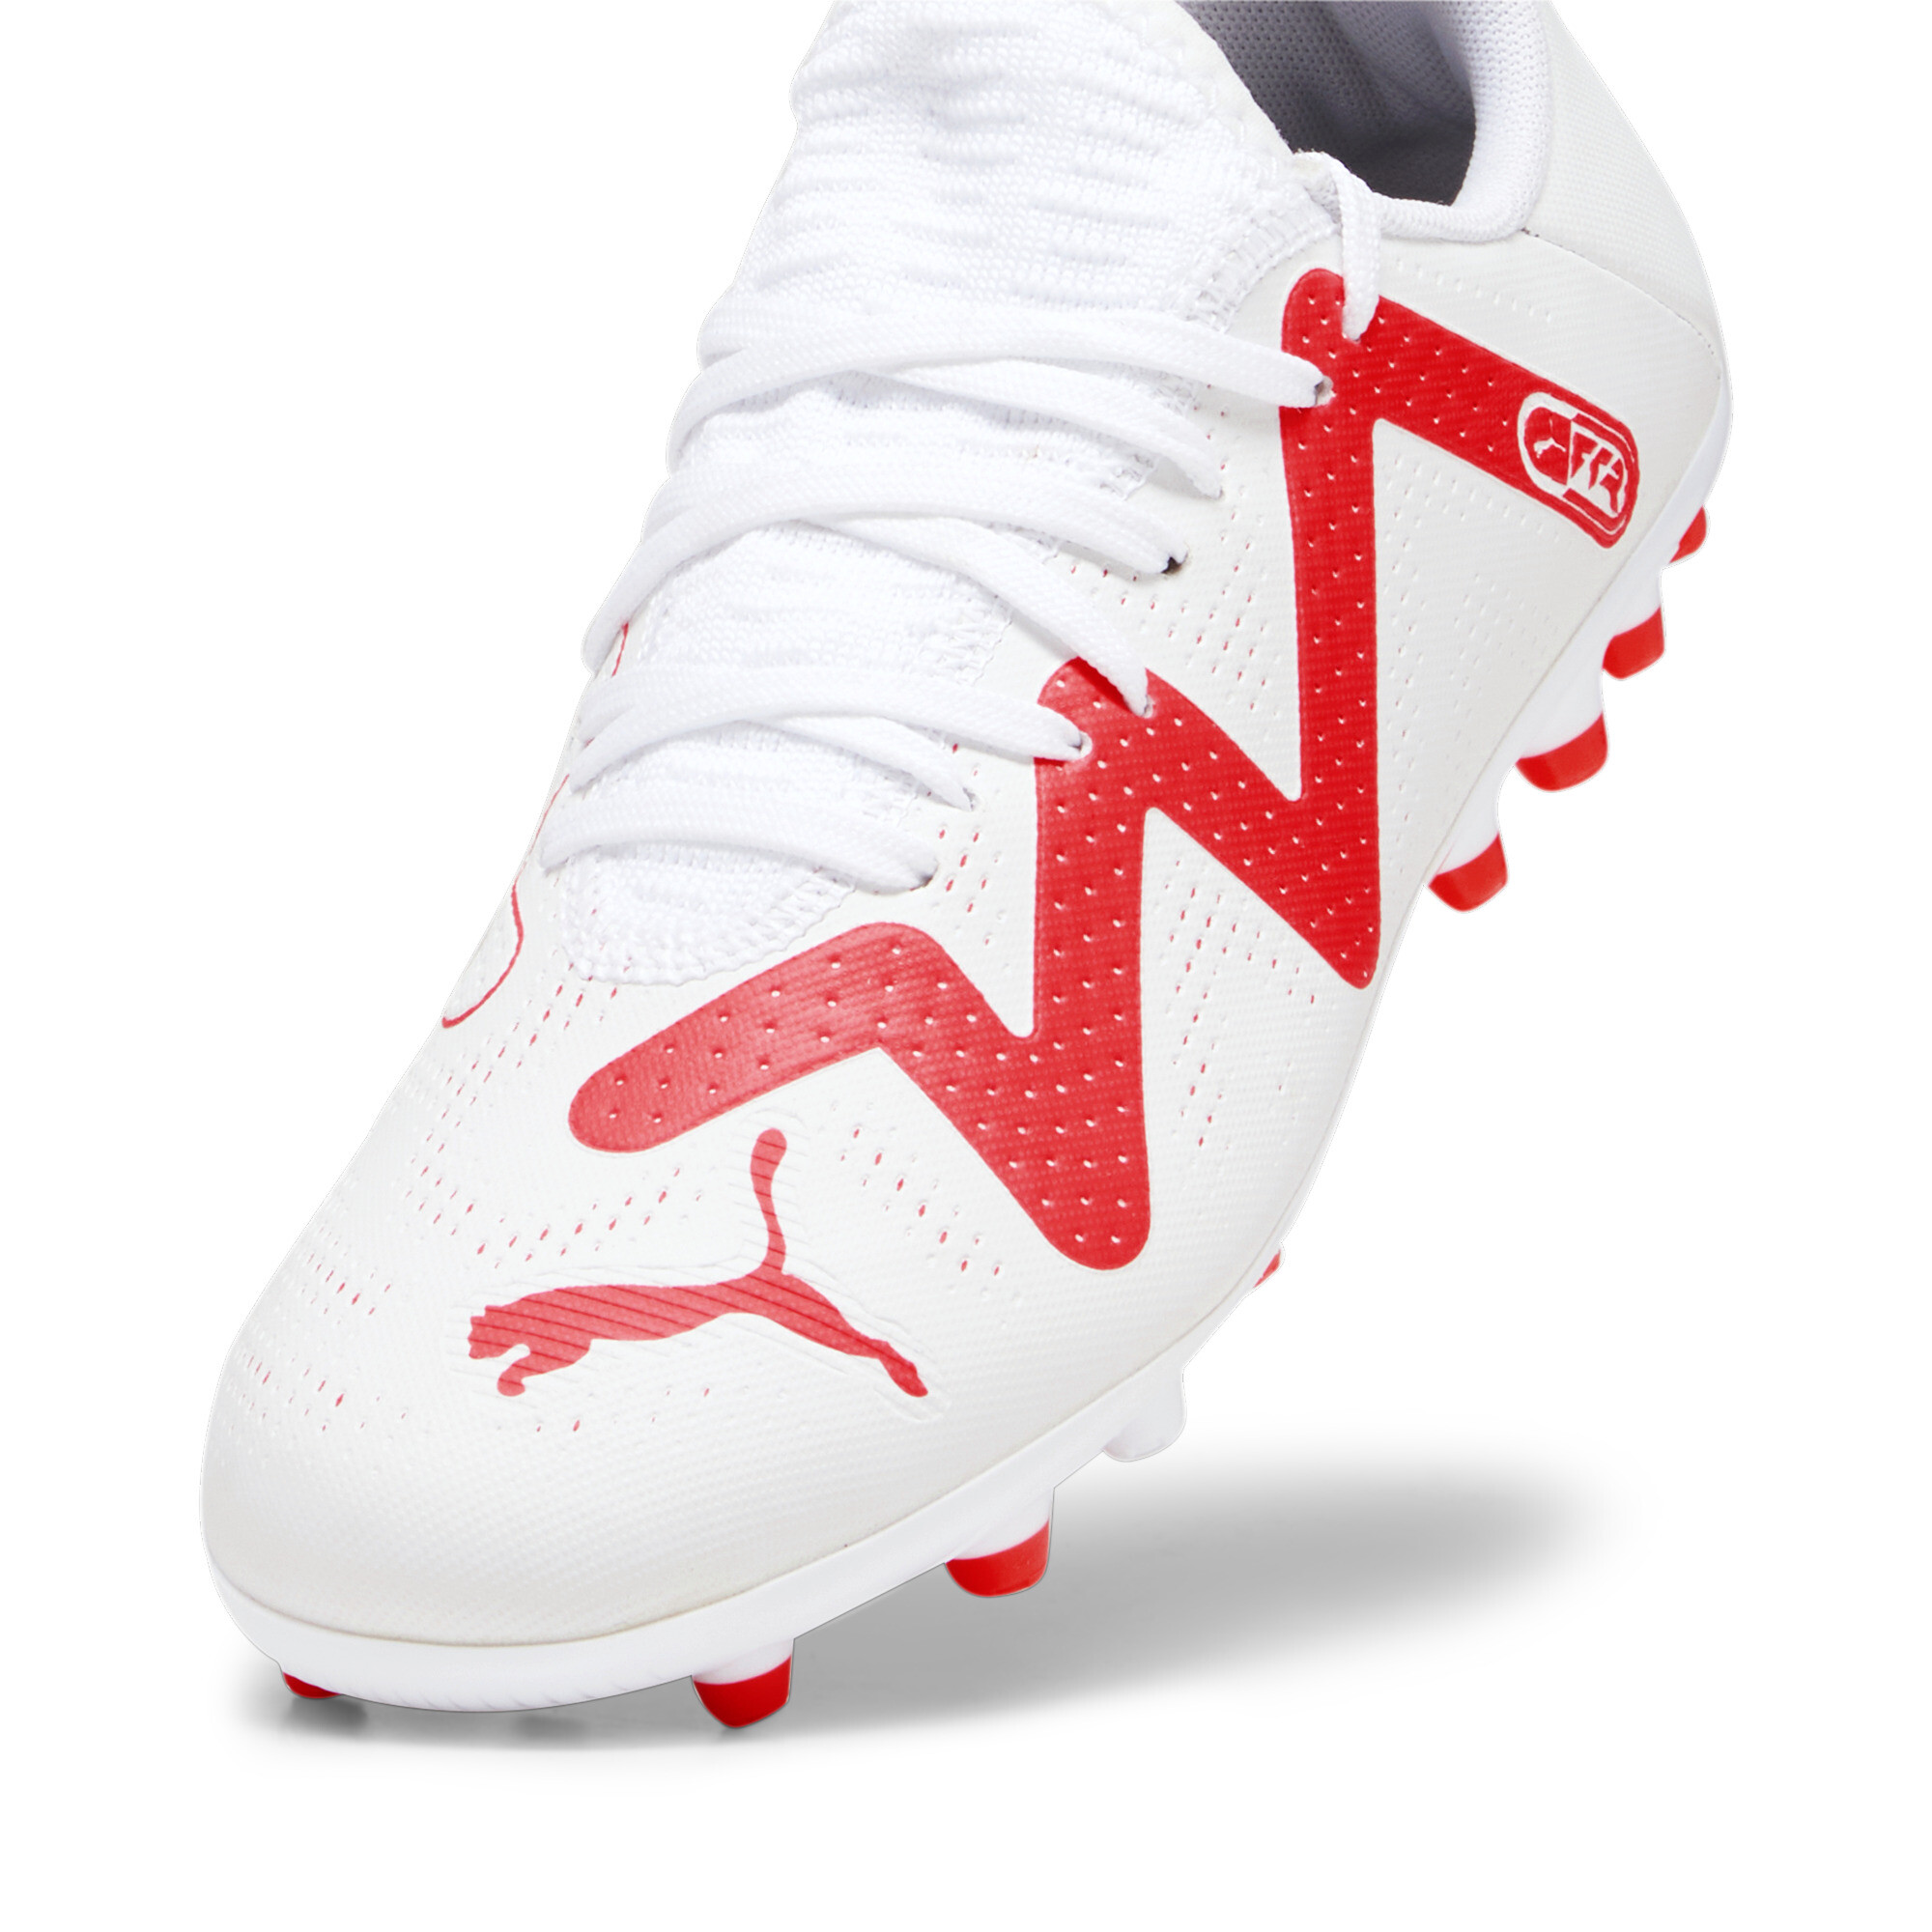 Puma FUTURE PLAY MG Youth Football Boots, White, Size 34, Shoes